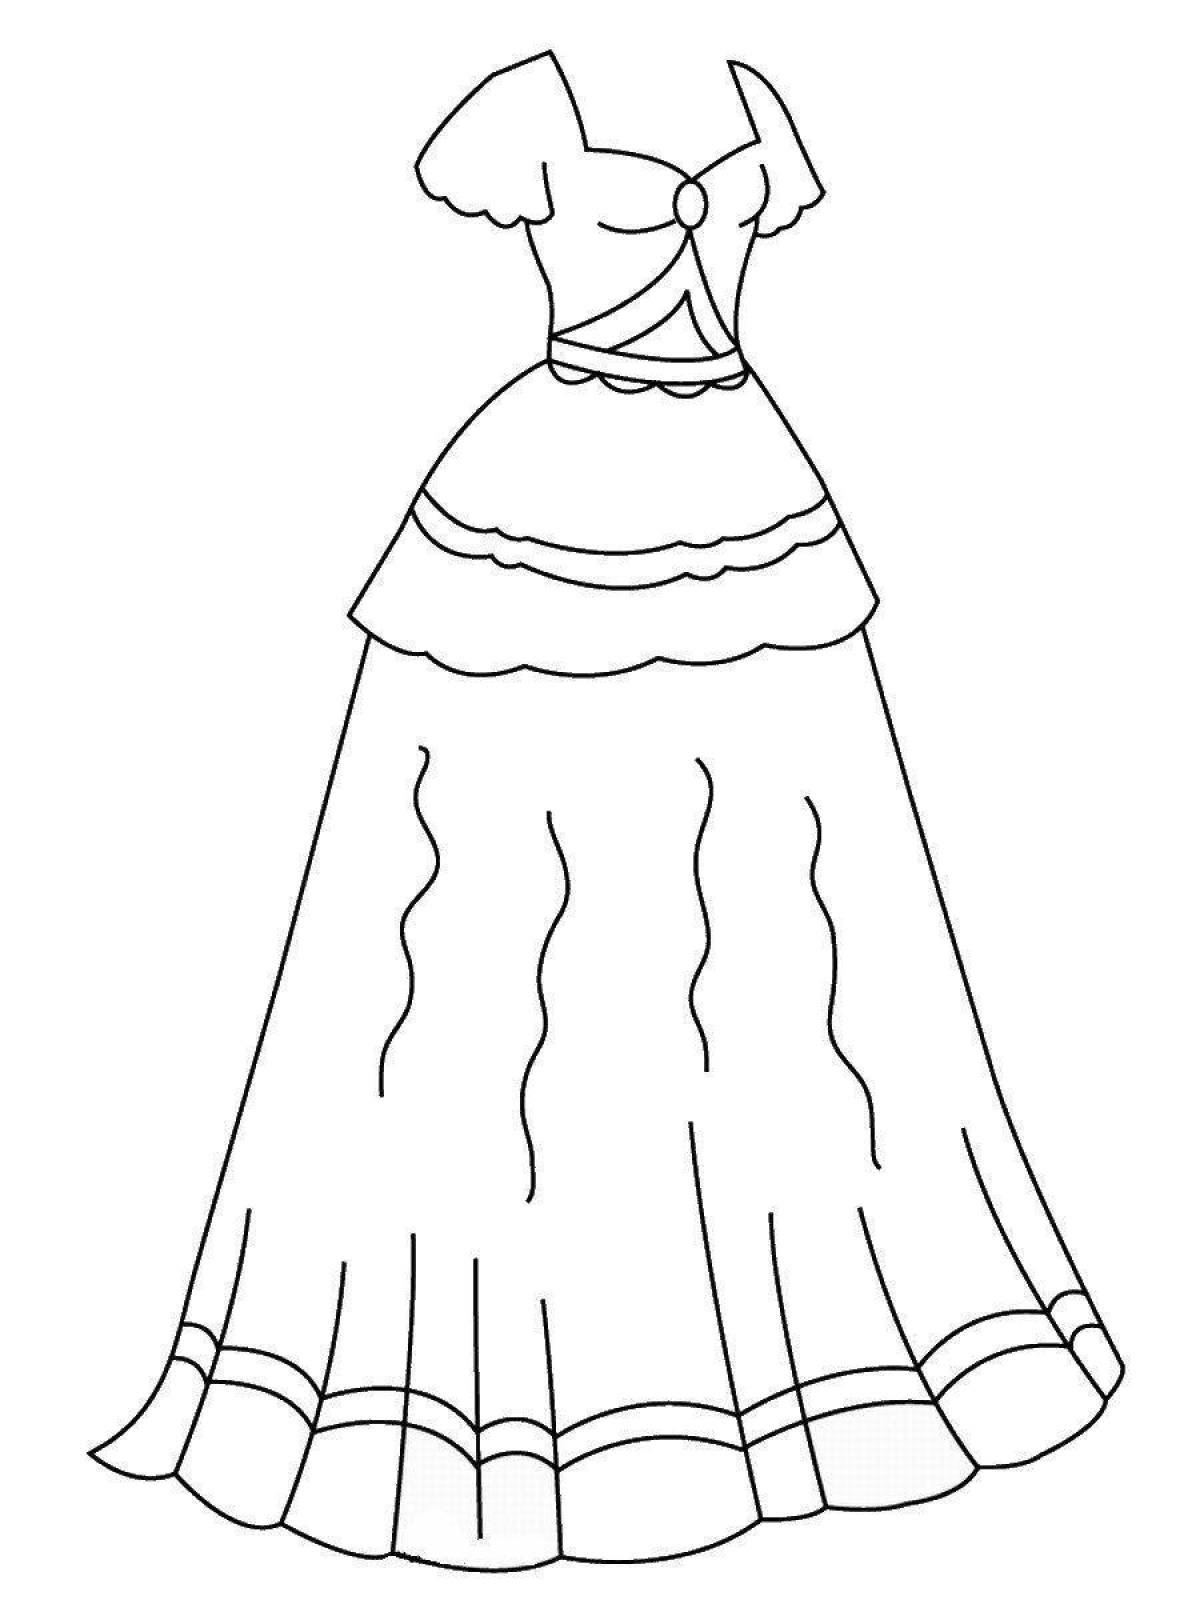 Coloring page elegant dress for mom